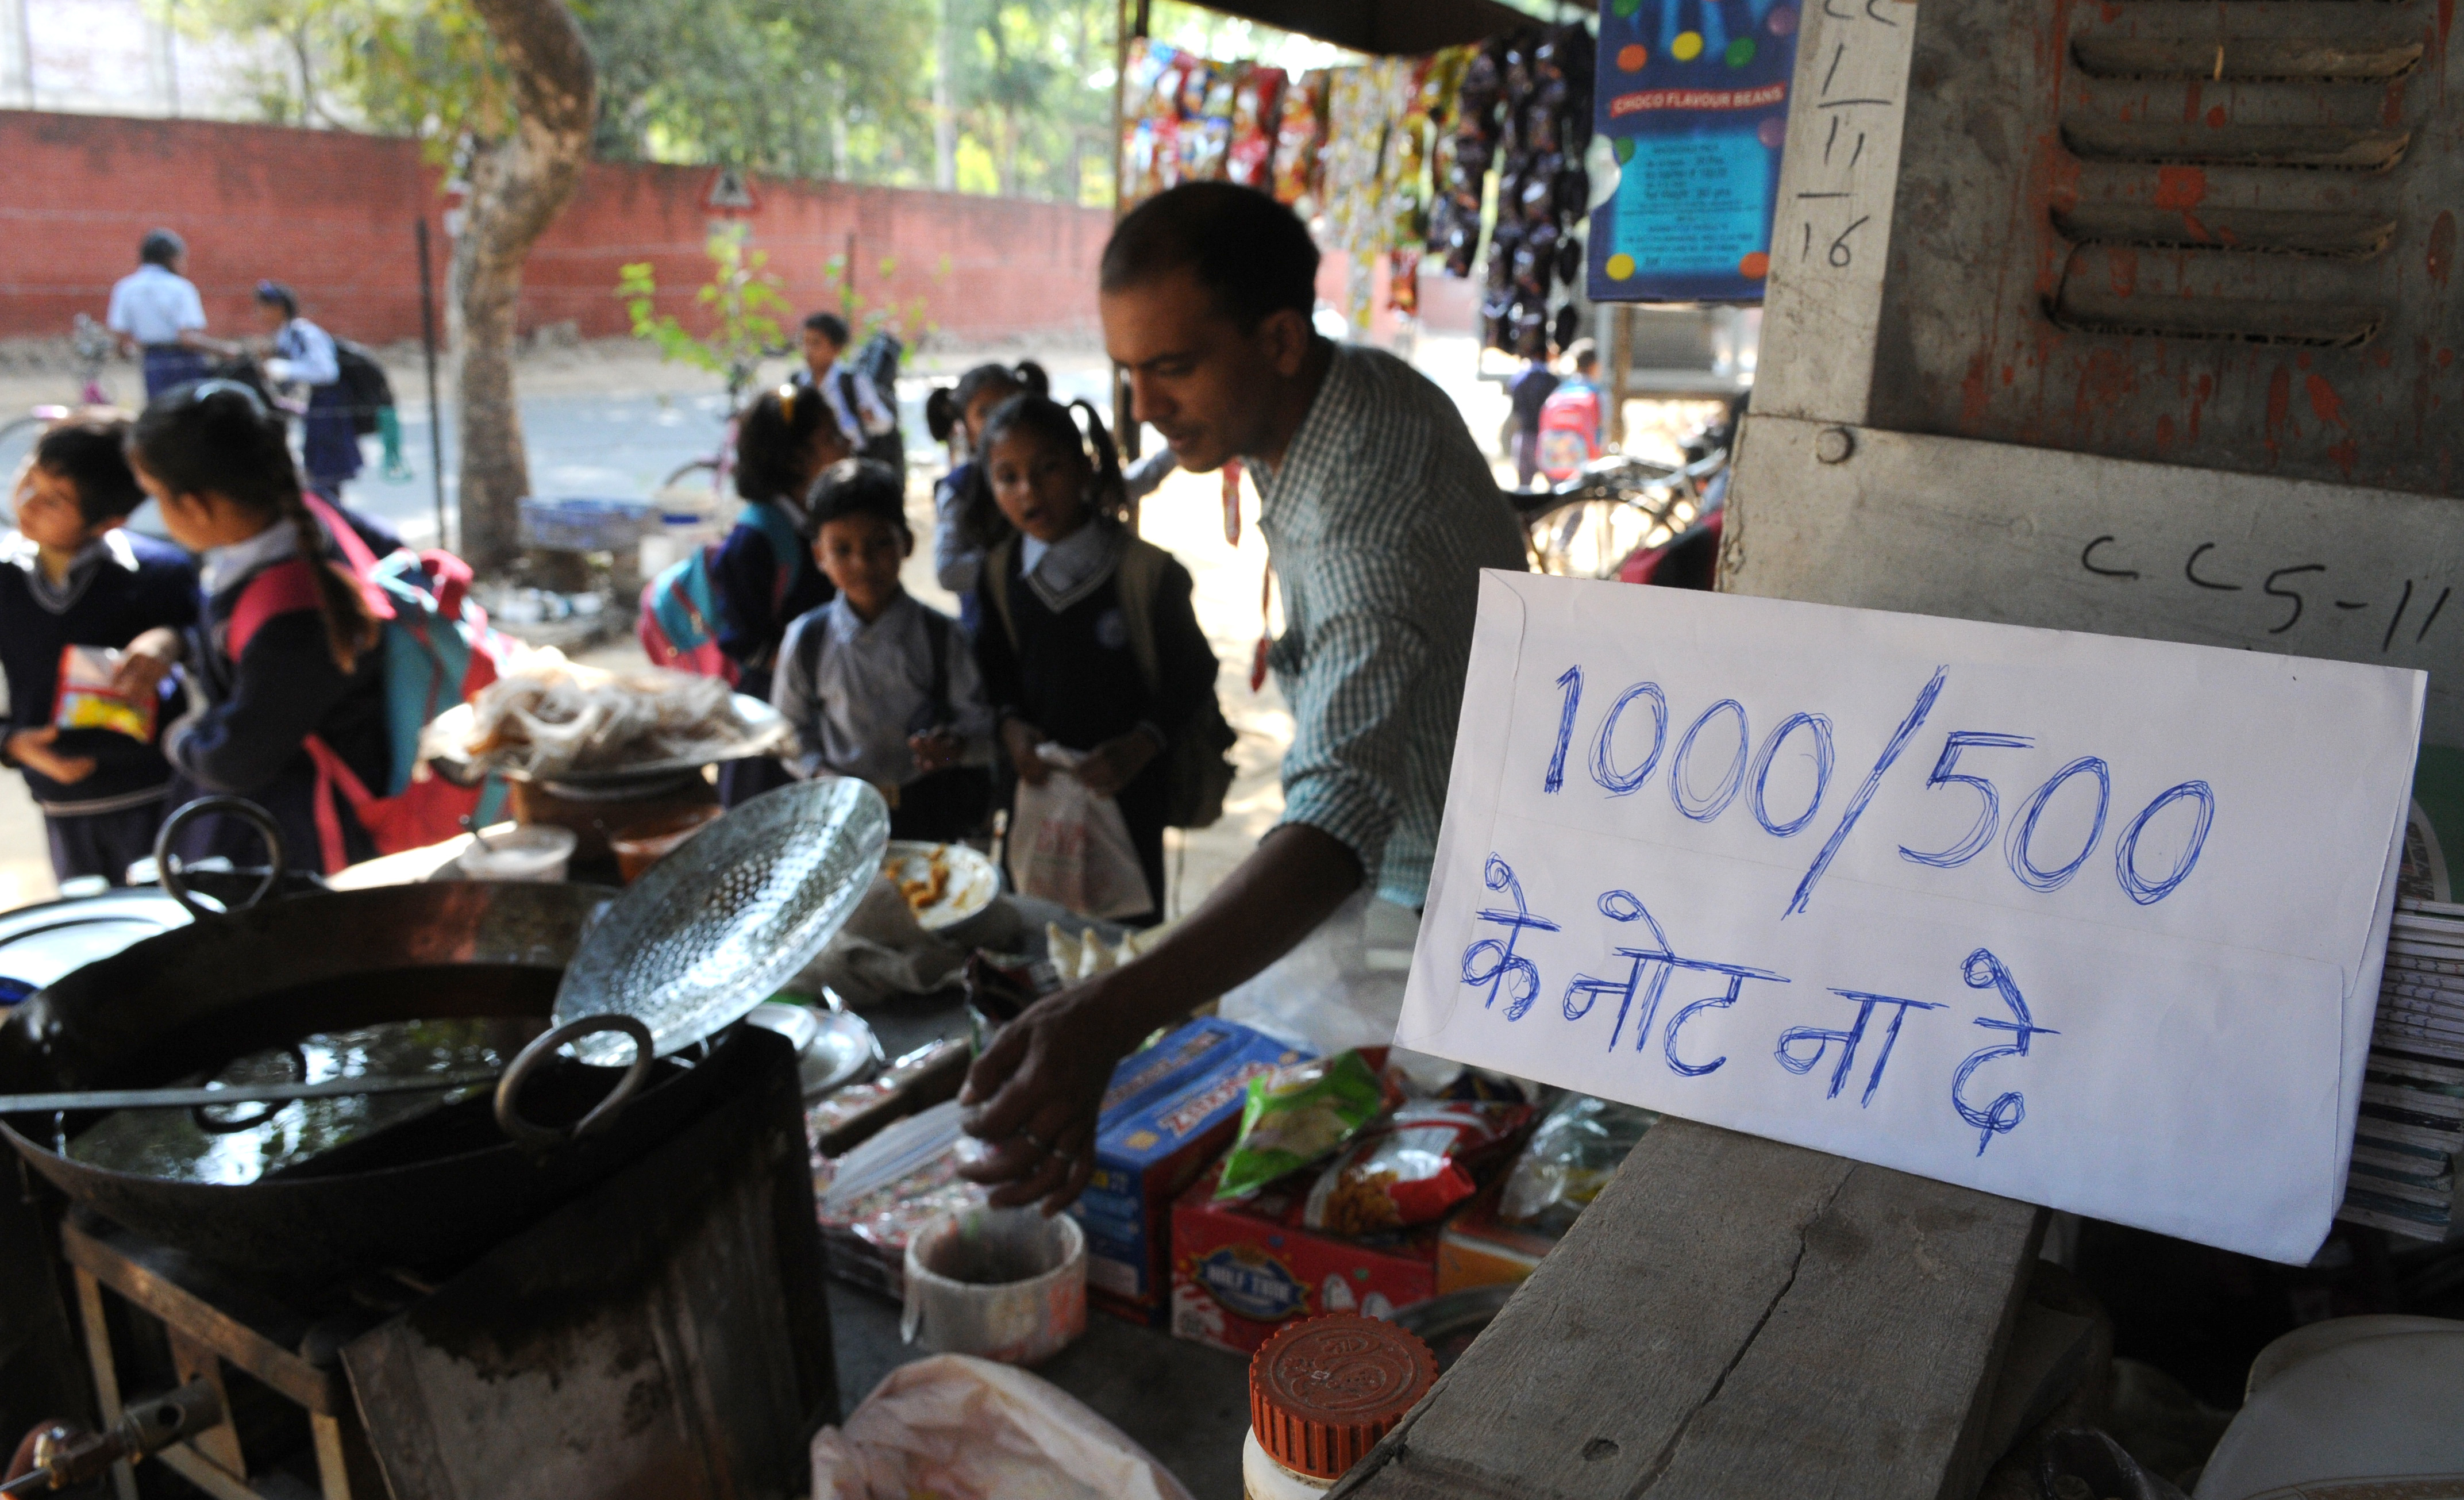 A roadside tea shop asks customers not to give 1000 or 500 rupee notes on November 10, 2016 in Chandigarh, India. (Hindustan Times via Getty Images)